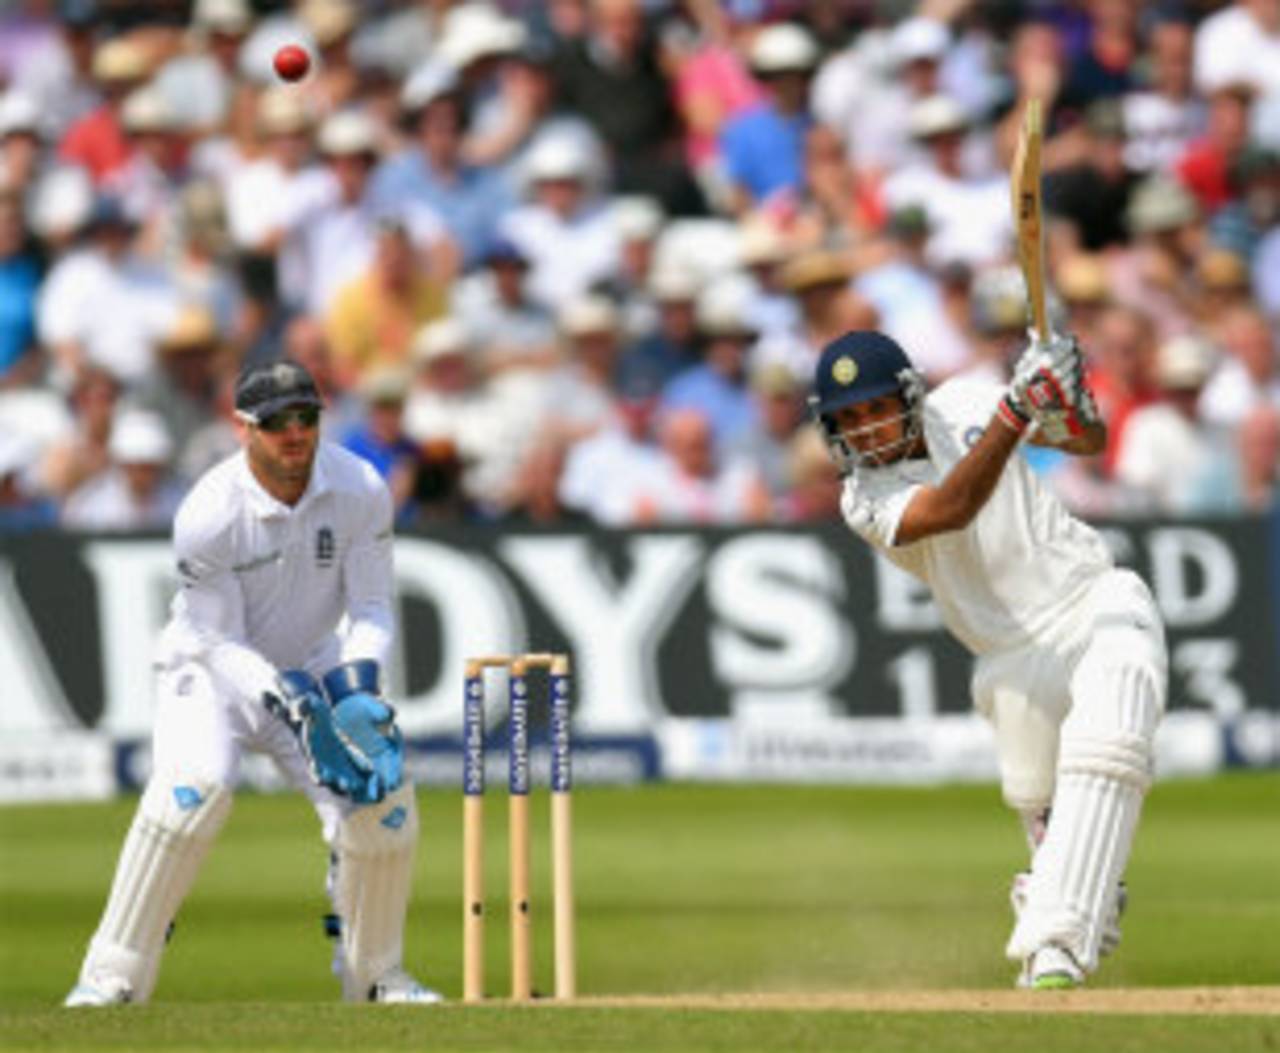 Picture perfect: Bhuvneshwar Kumar plays an inside-out cover drive, England v India, 1st Investec Test, Trent Bridge, 2nd day, July 10, 2014